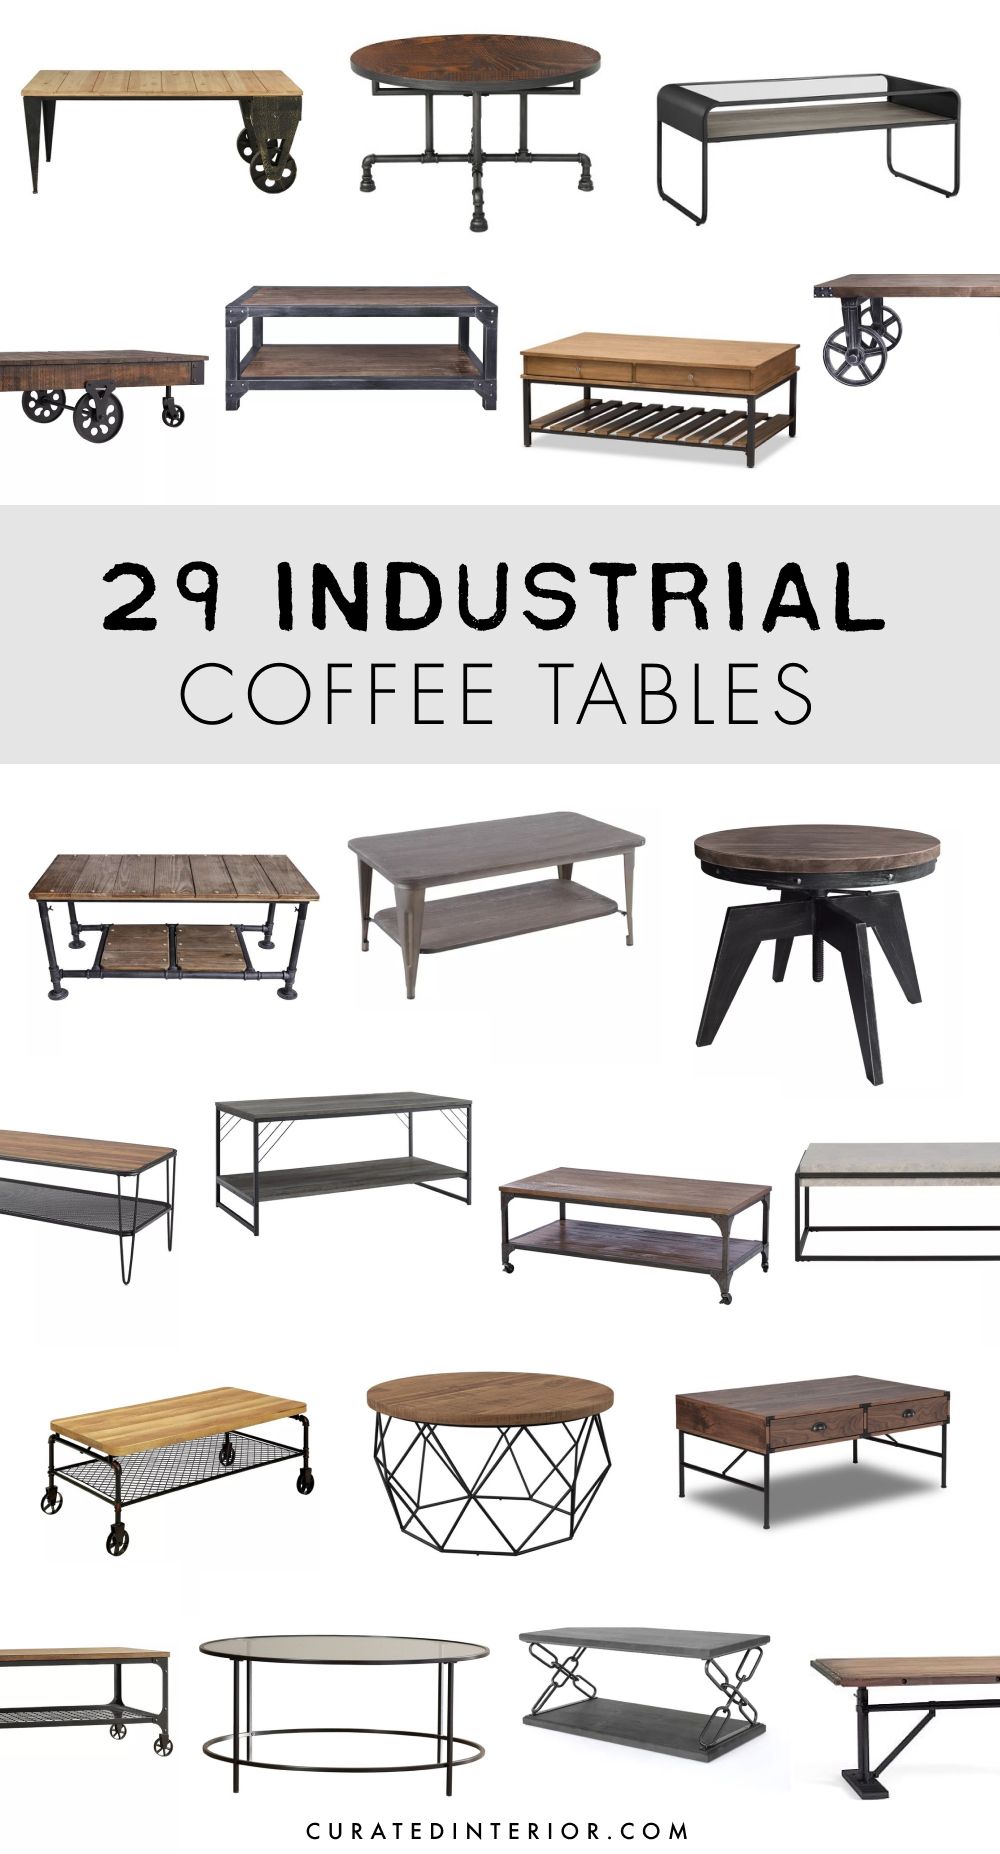 29 Industrial Coffee Tables